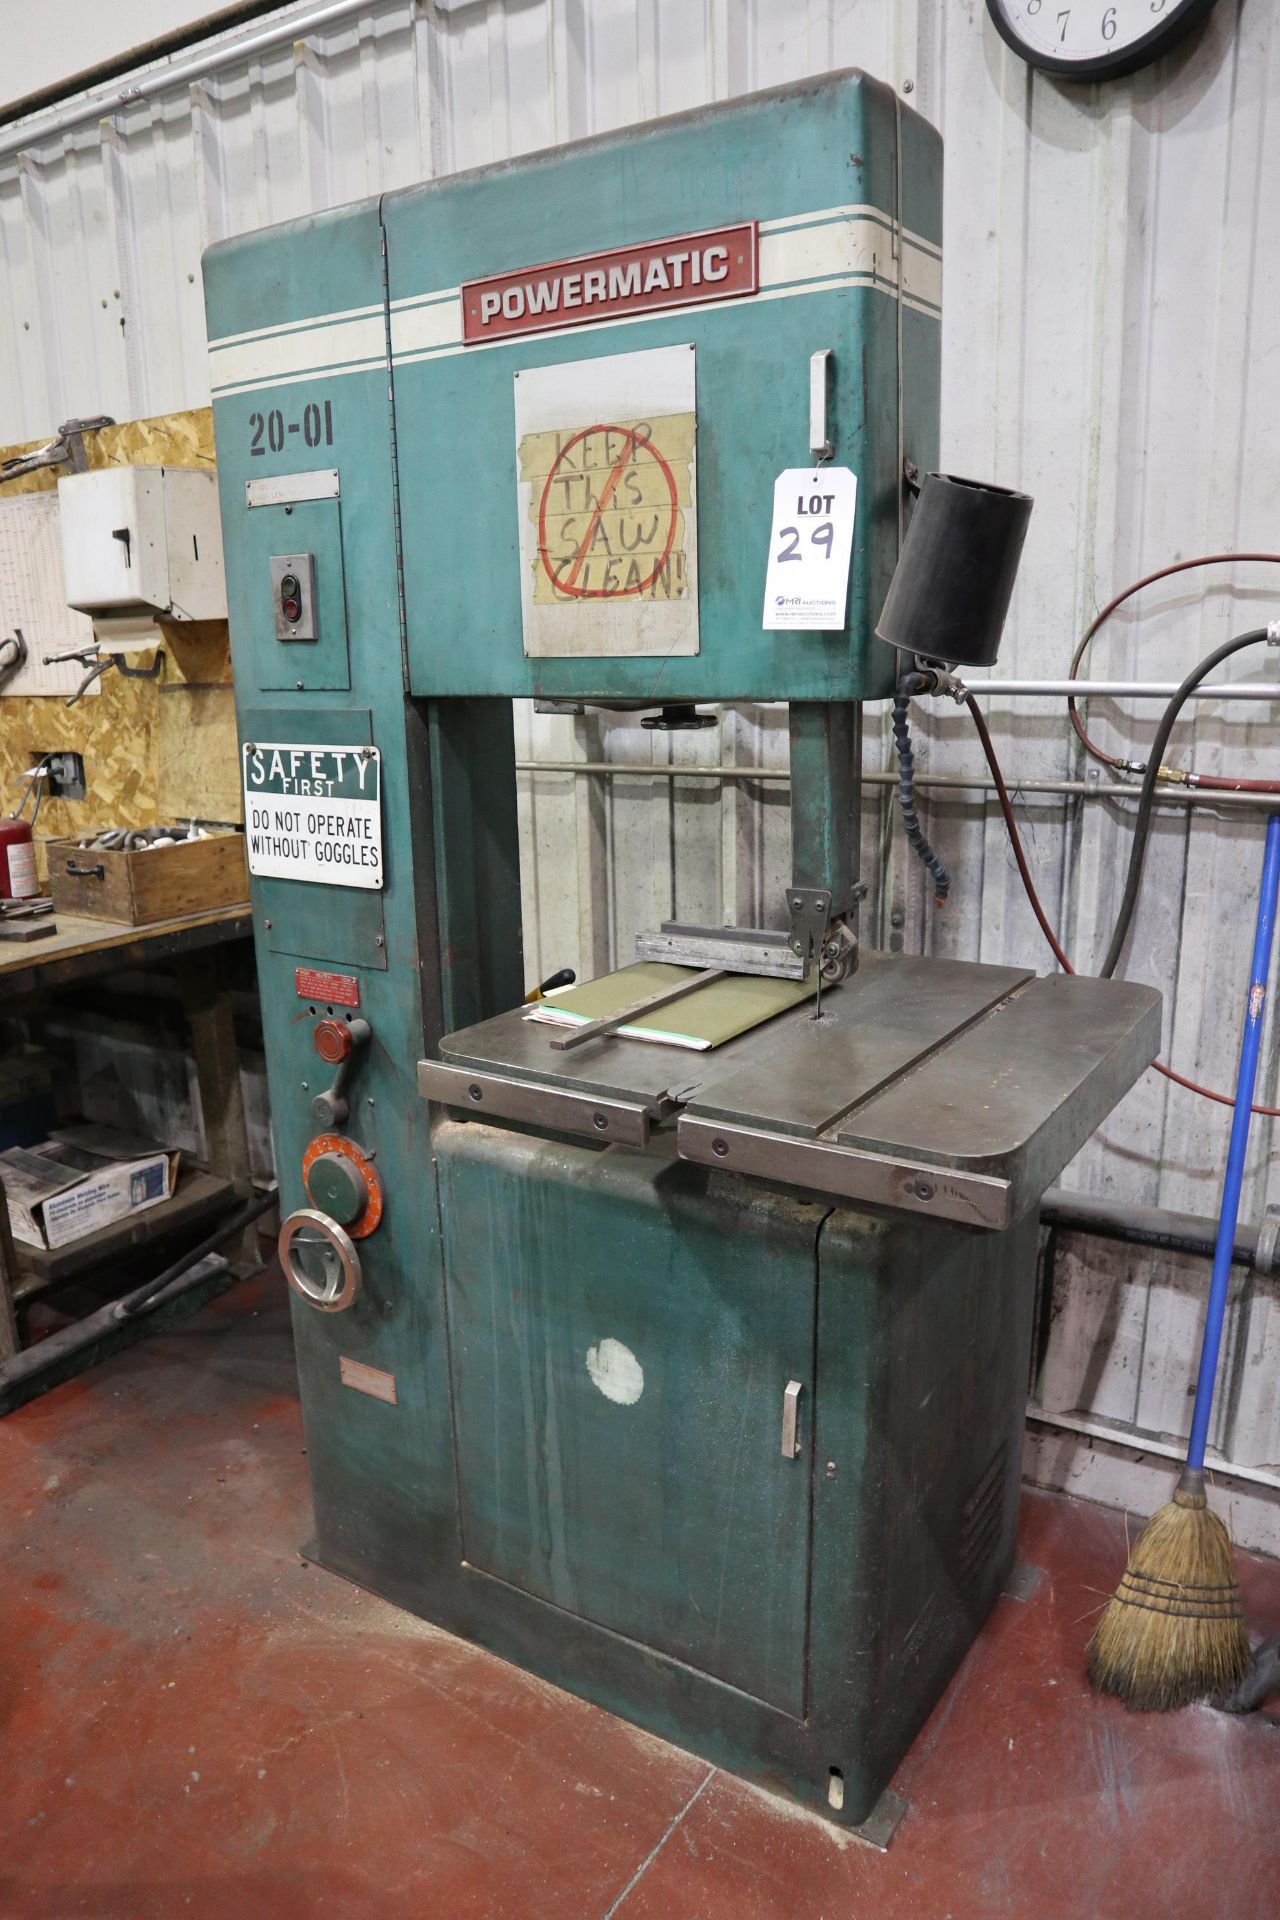 POWERMATIC VERTICAL METALCUTTING BANDSAW MODEL 87, 20", S/N 287208 **Rigging provided exclusively by